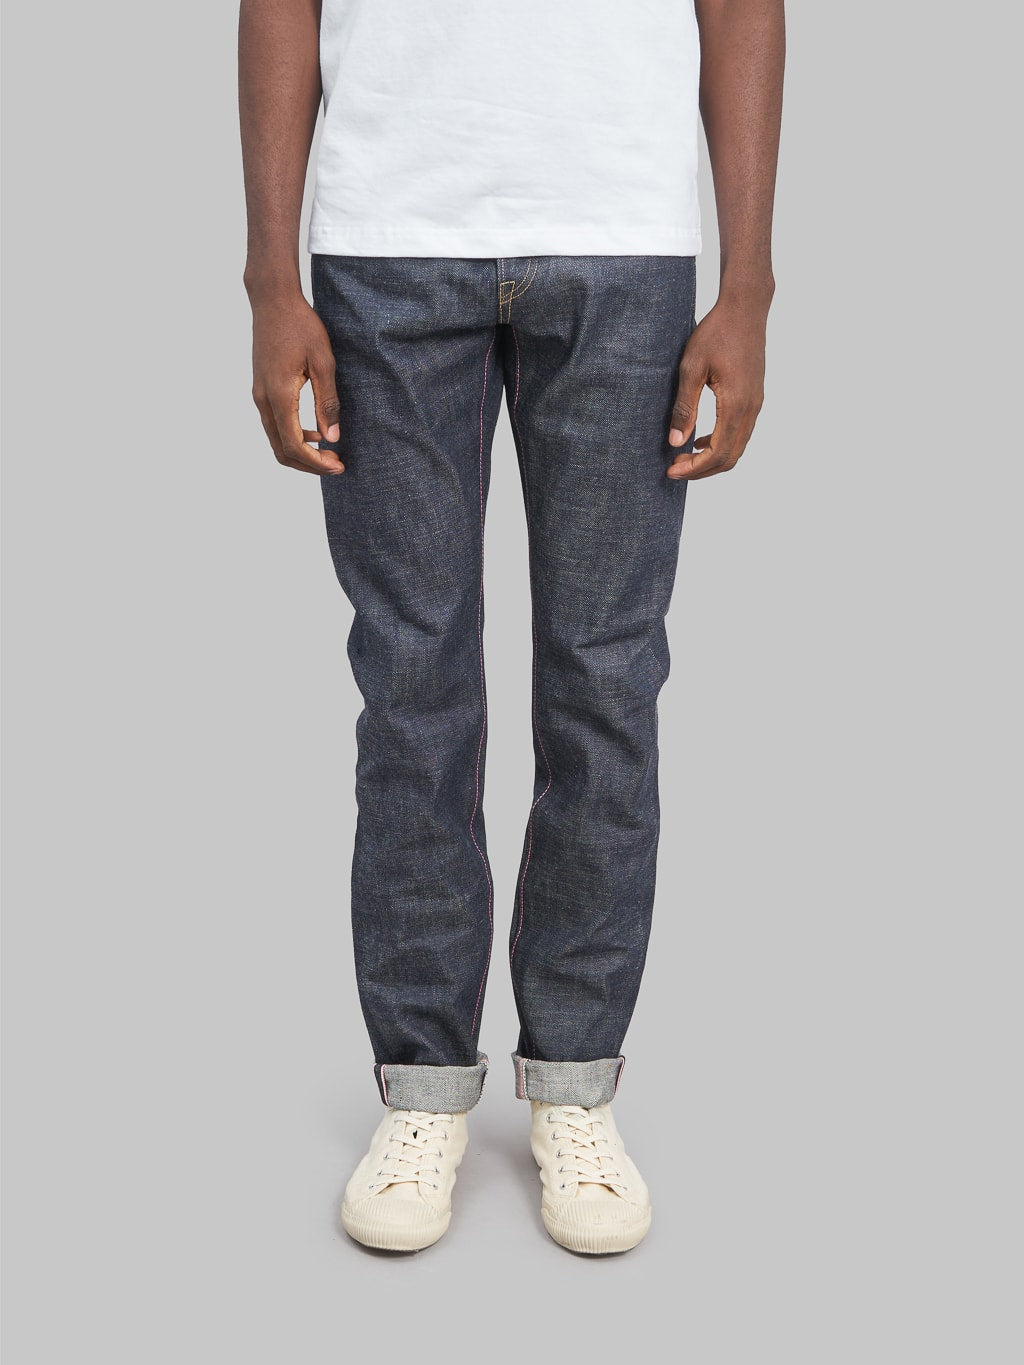 Momotaro legacy blue high tapered jeans front fit